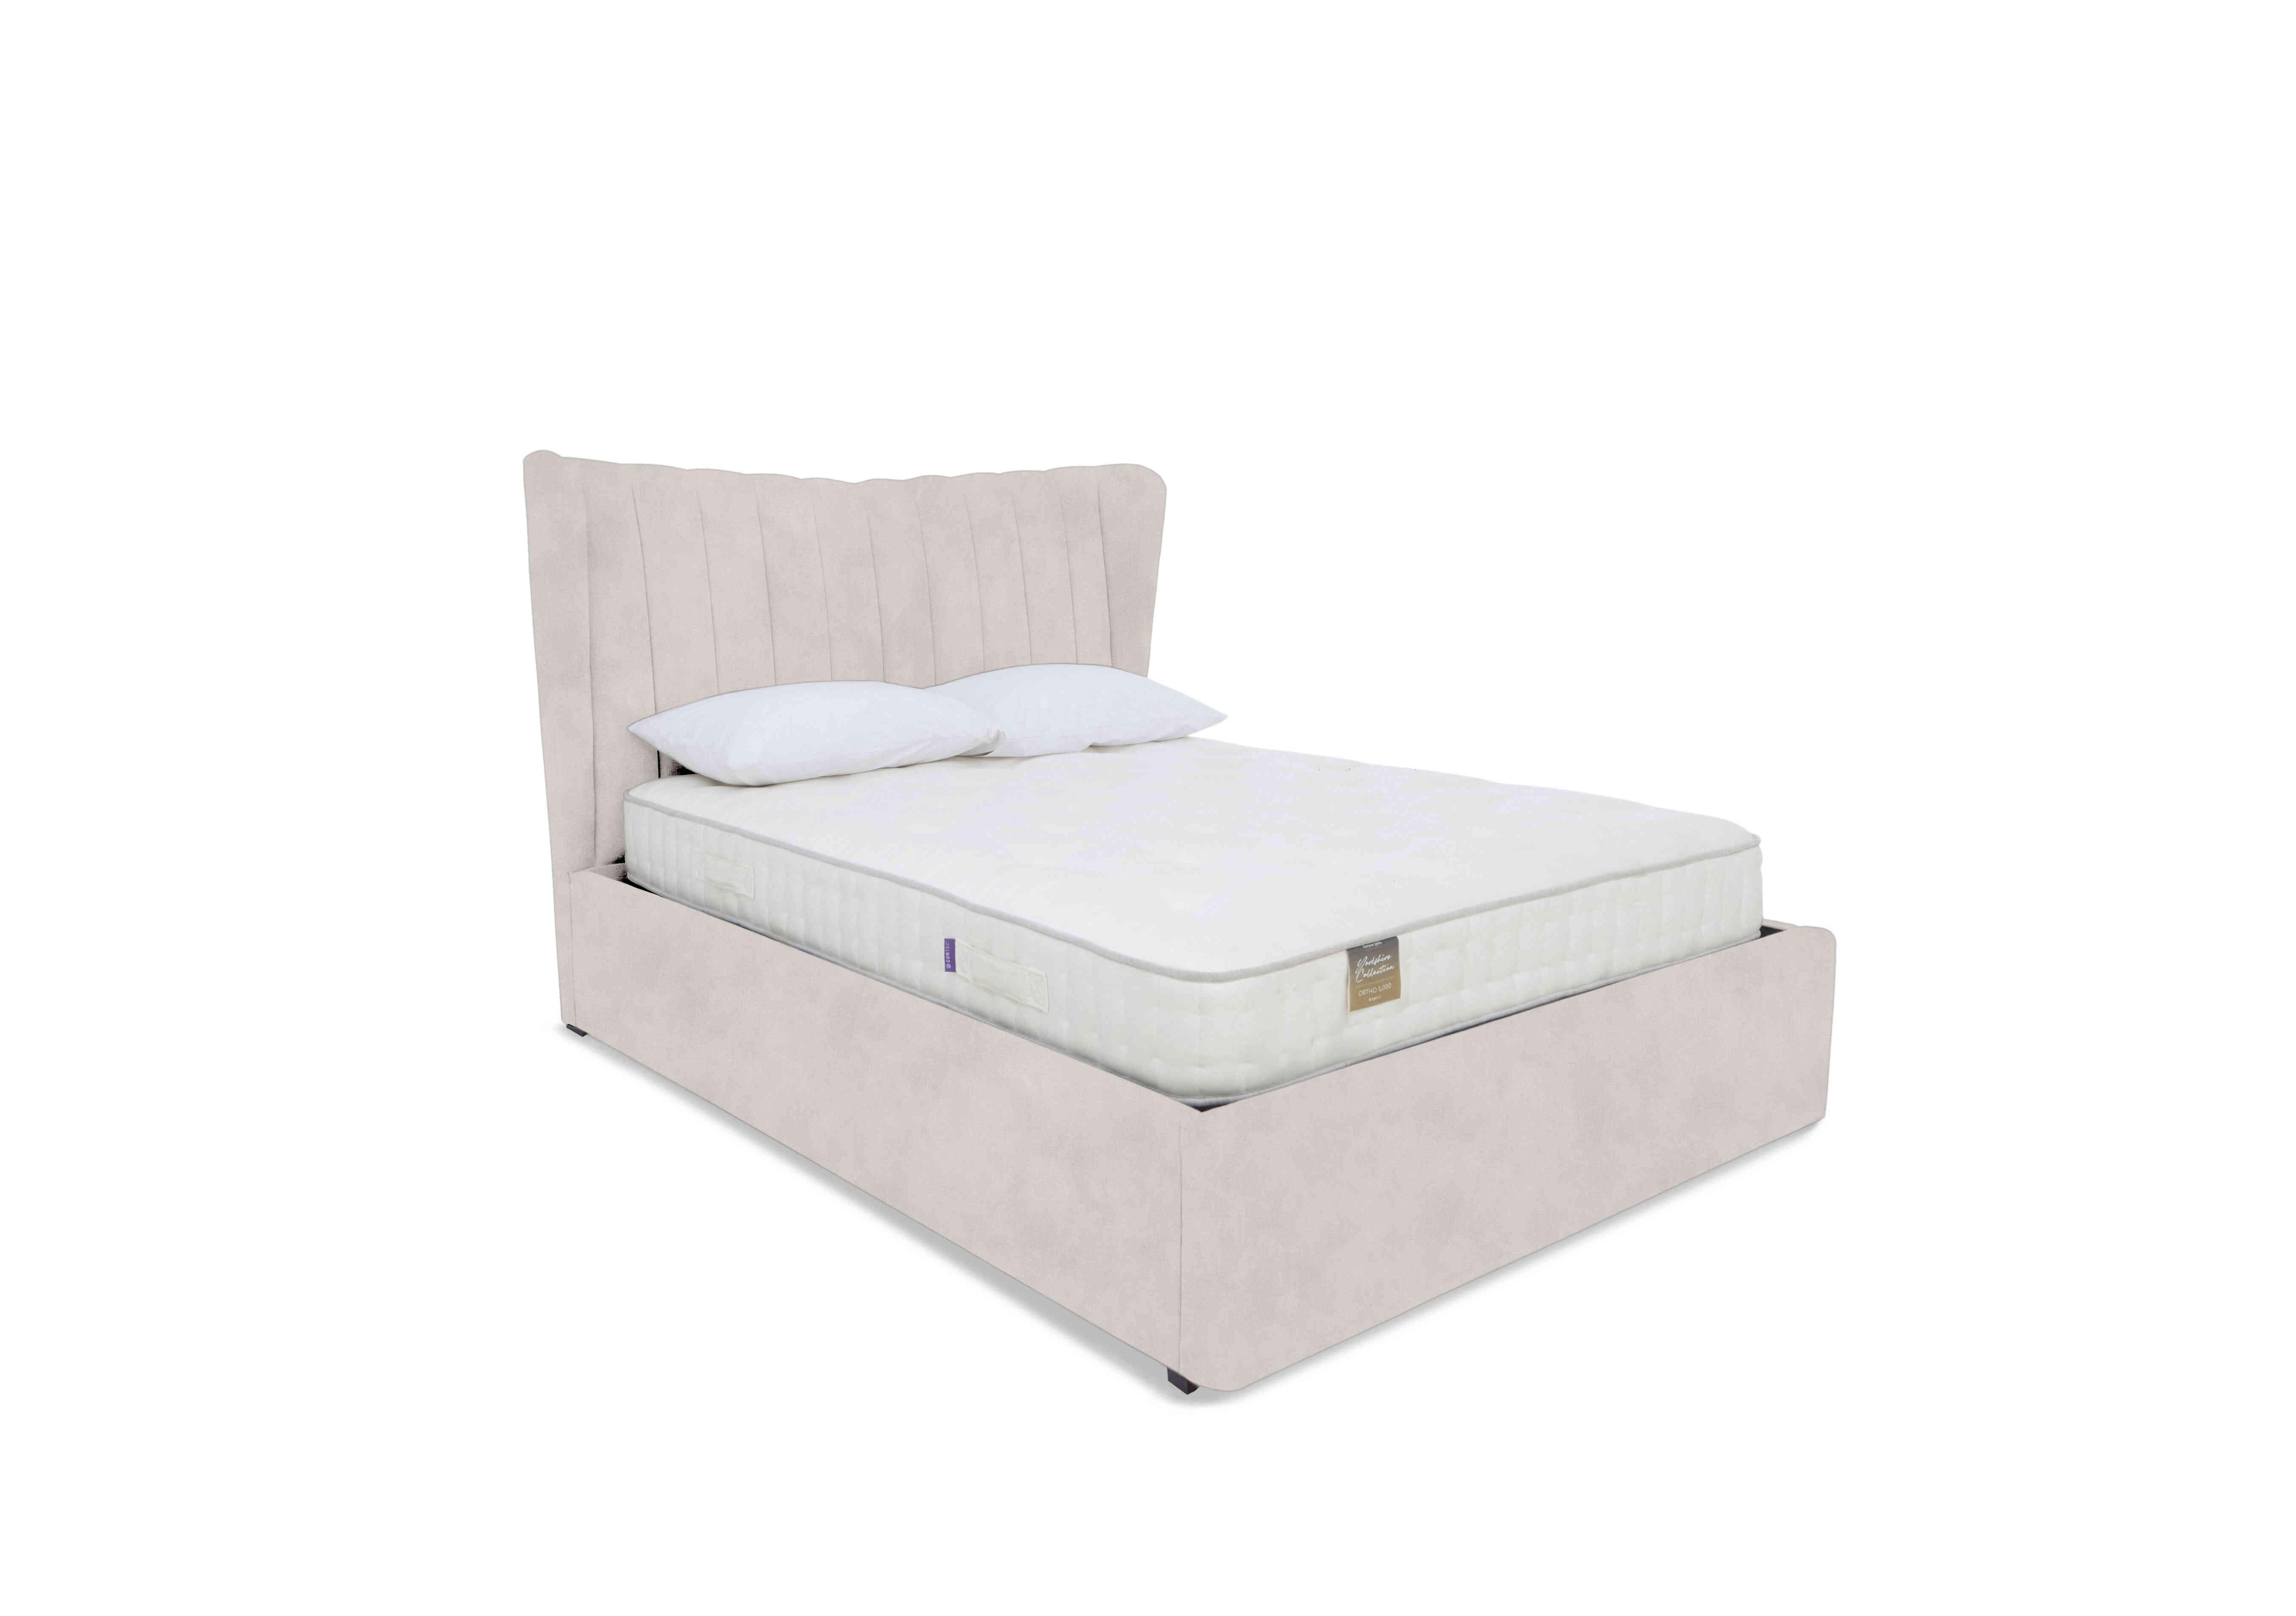 Bourne Ottoman Bed Frame in Lace Ivory on Furniture Village